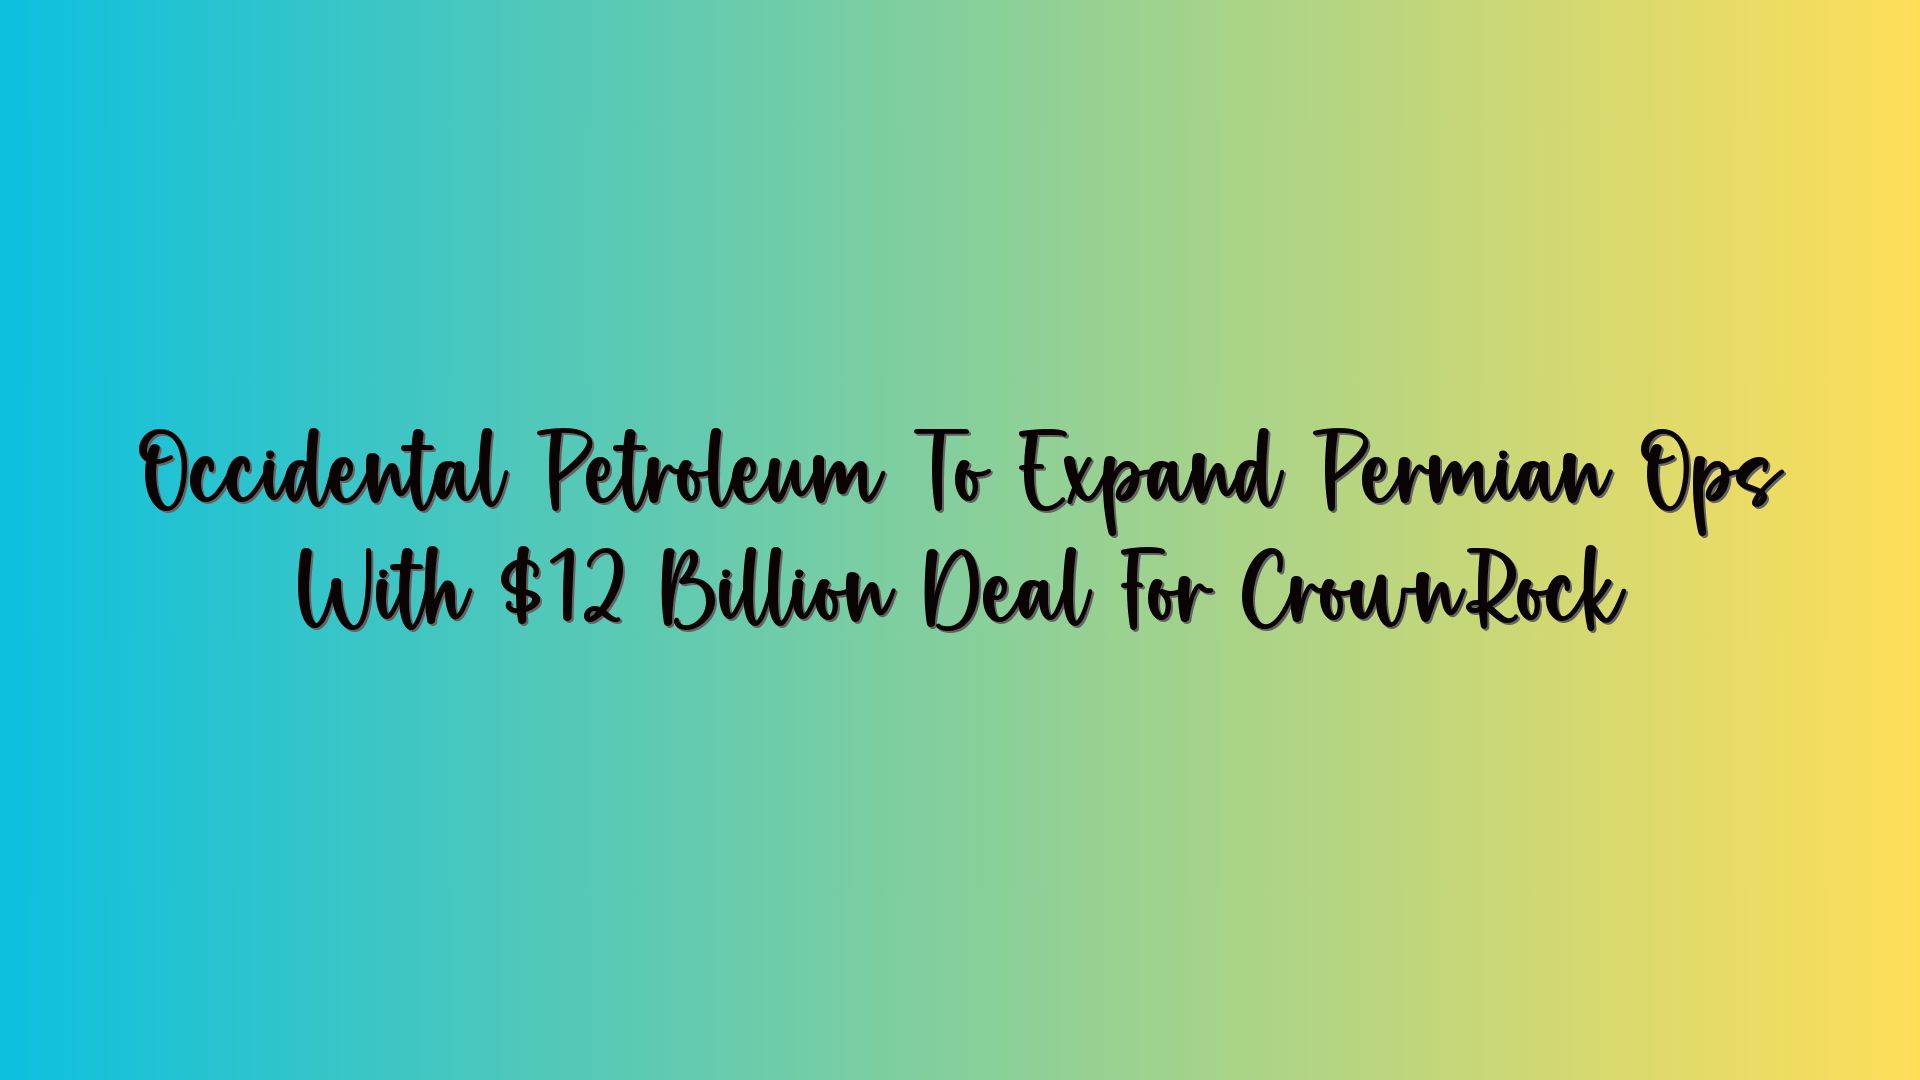 Occidental Petroleum To Expand Permian Ops With $12 Billion Deal For CrownRock